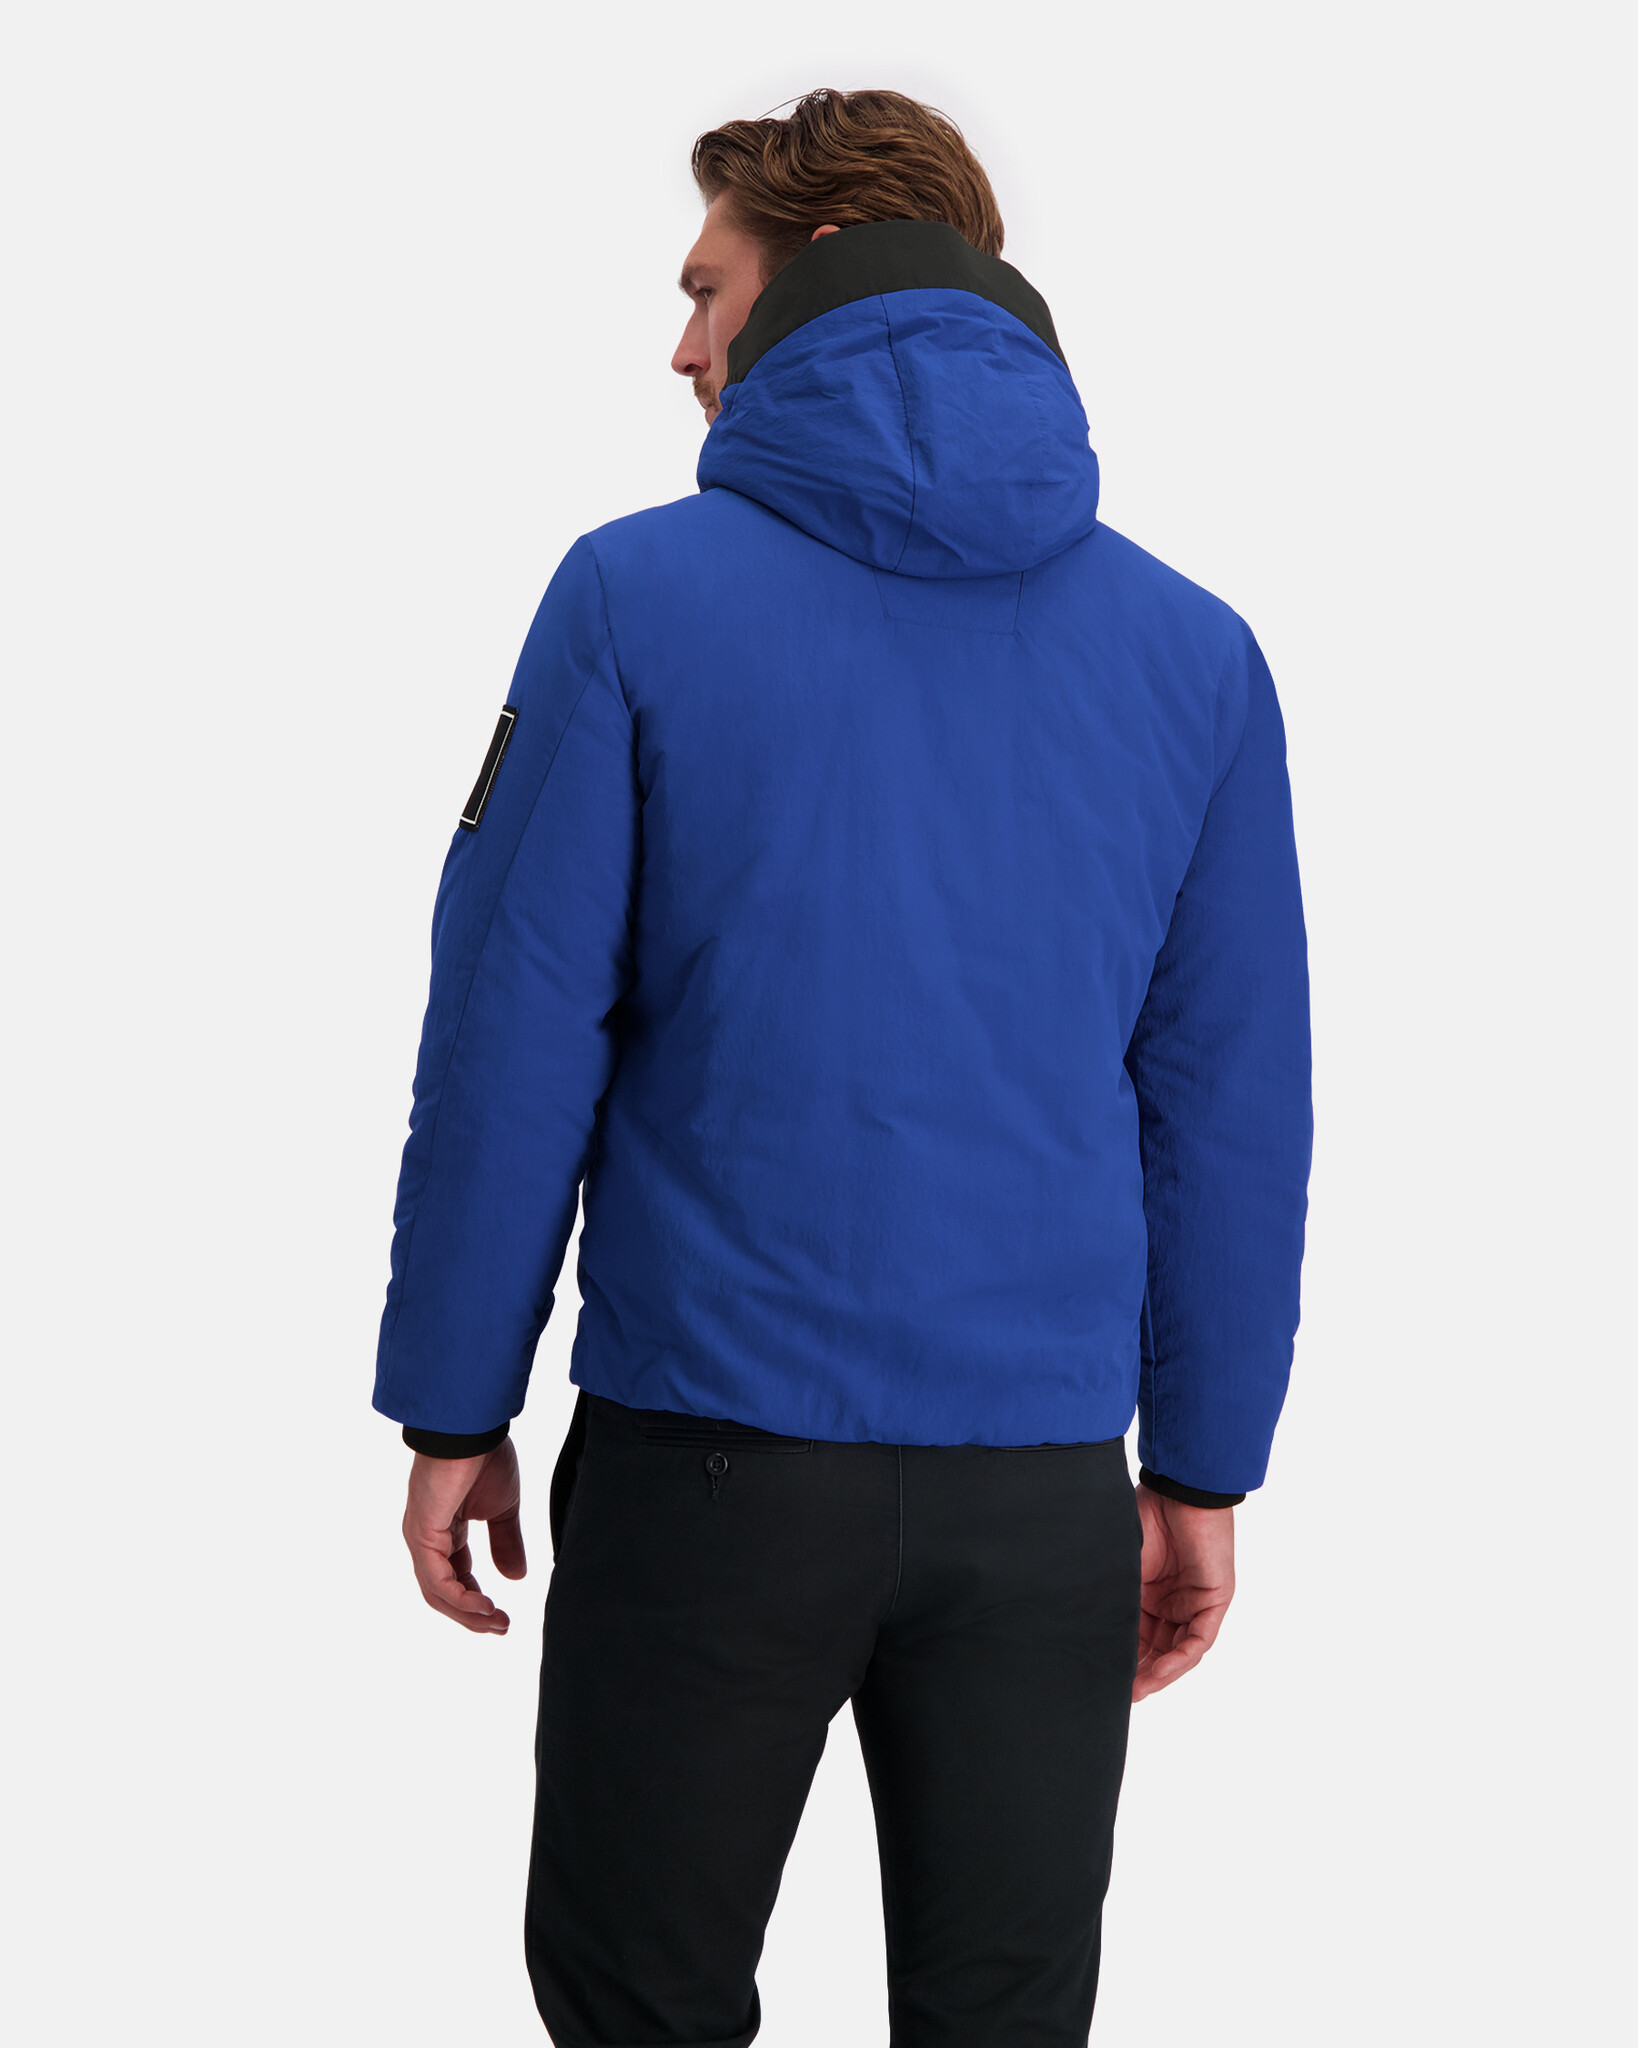 Jacket with fixed hood made of water repellent nylon crinkle fabric with REPREVE® padding